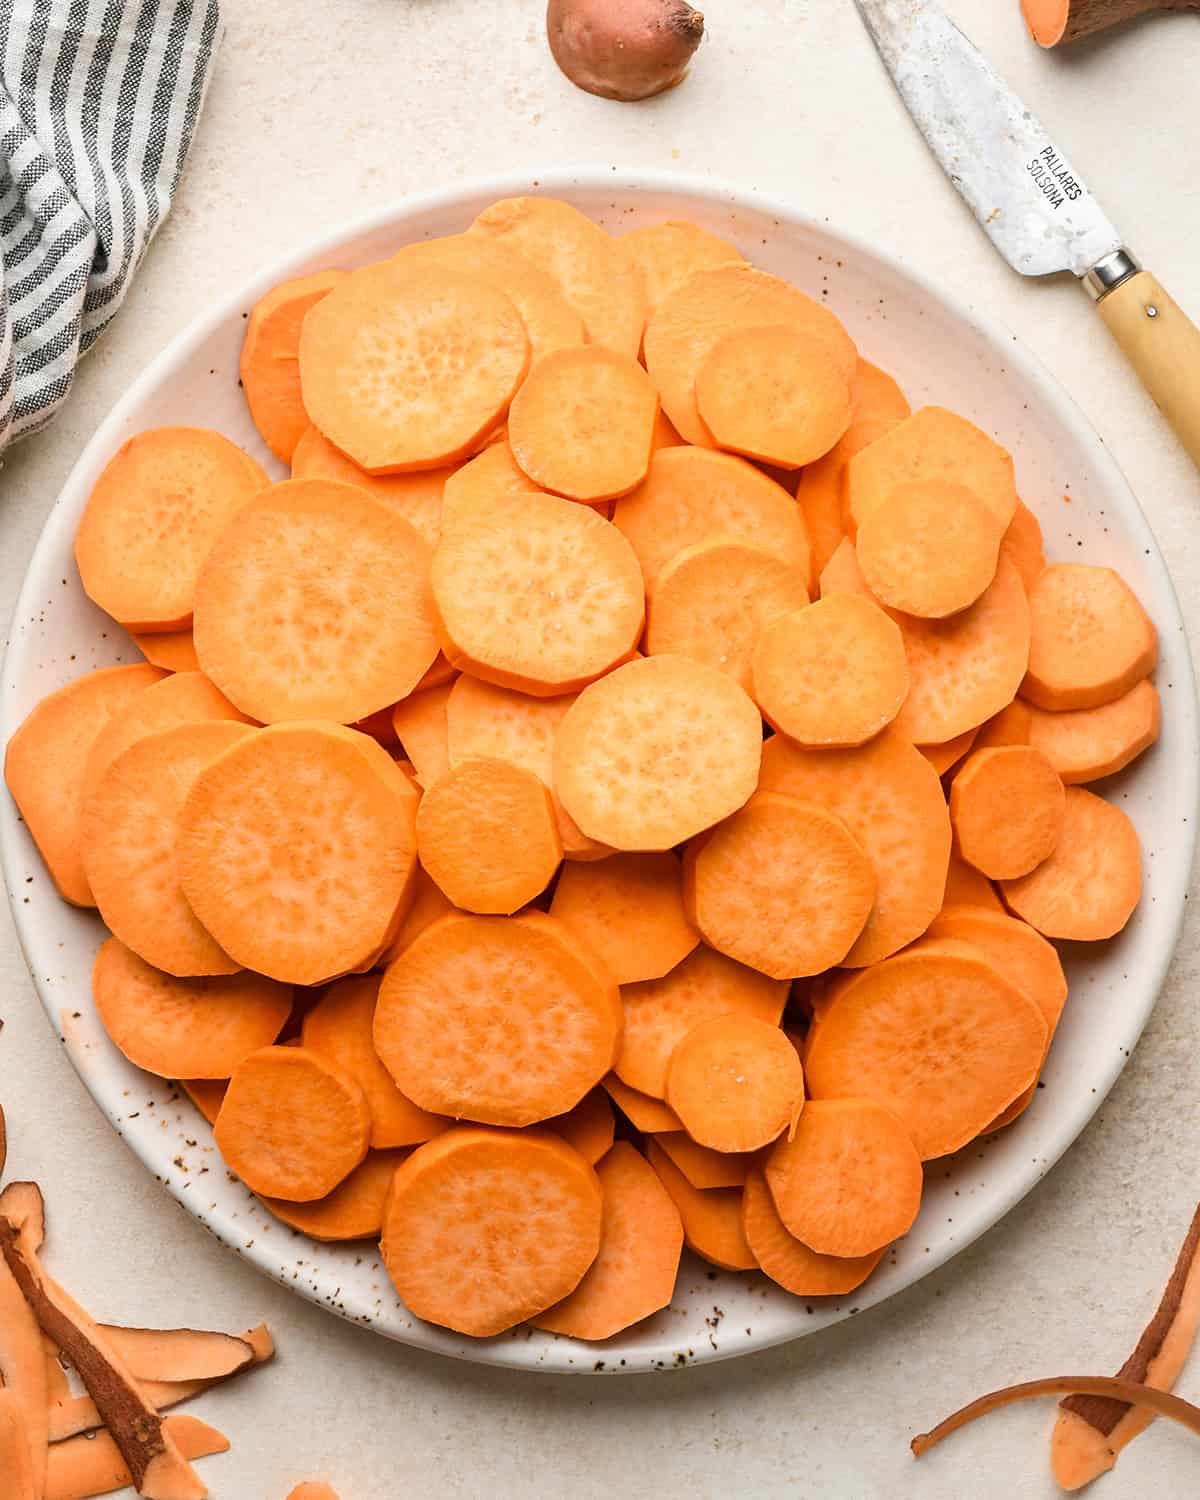 round slices of peeled sweet potatoes on a plate